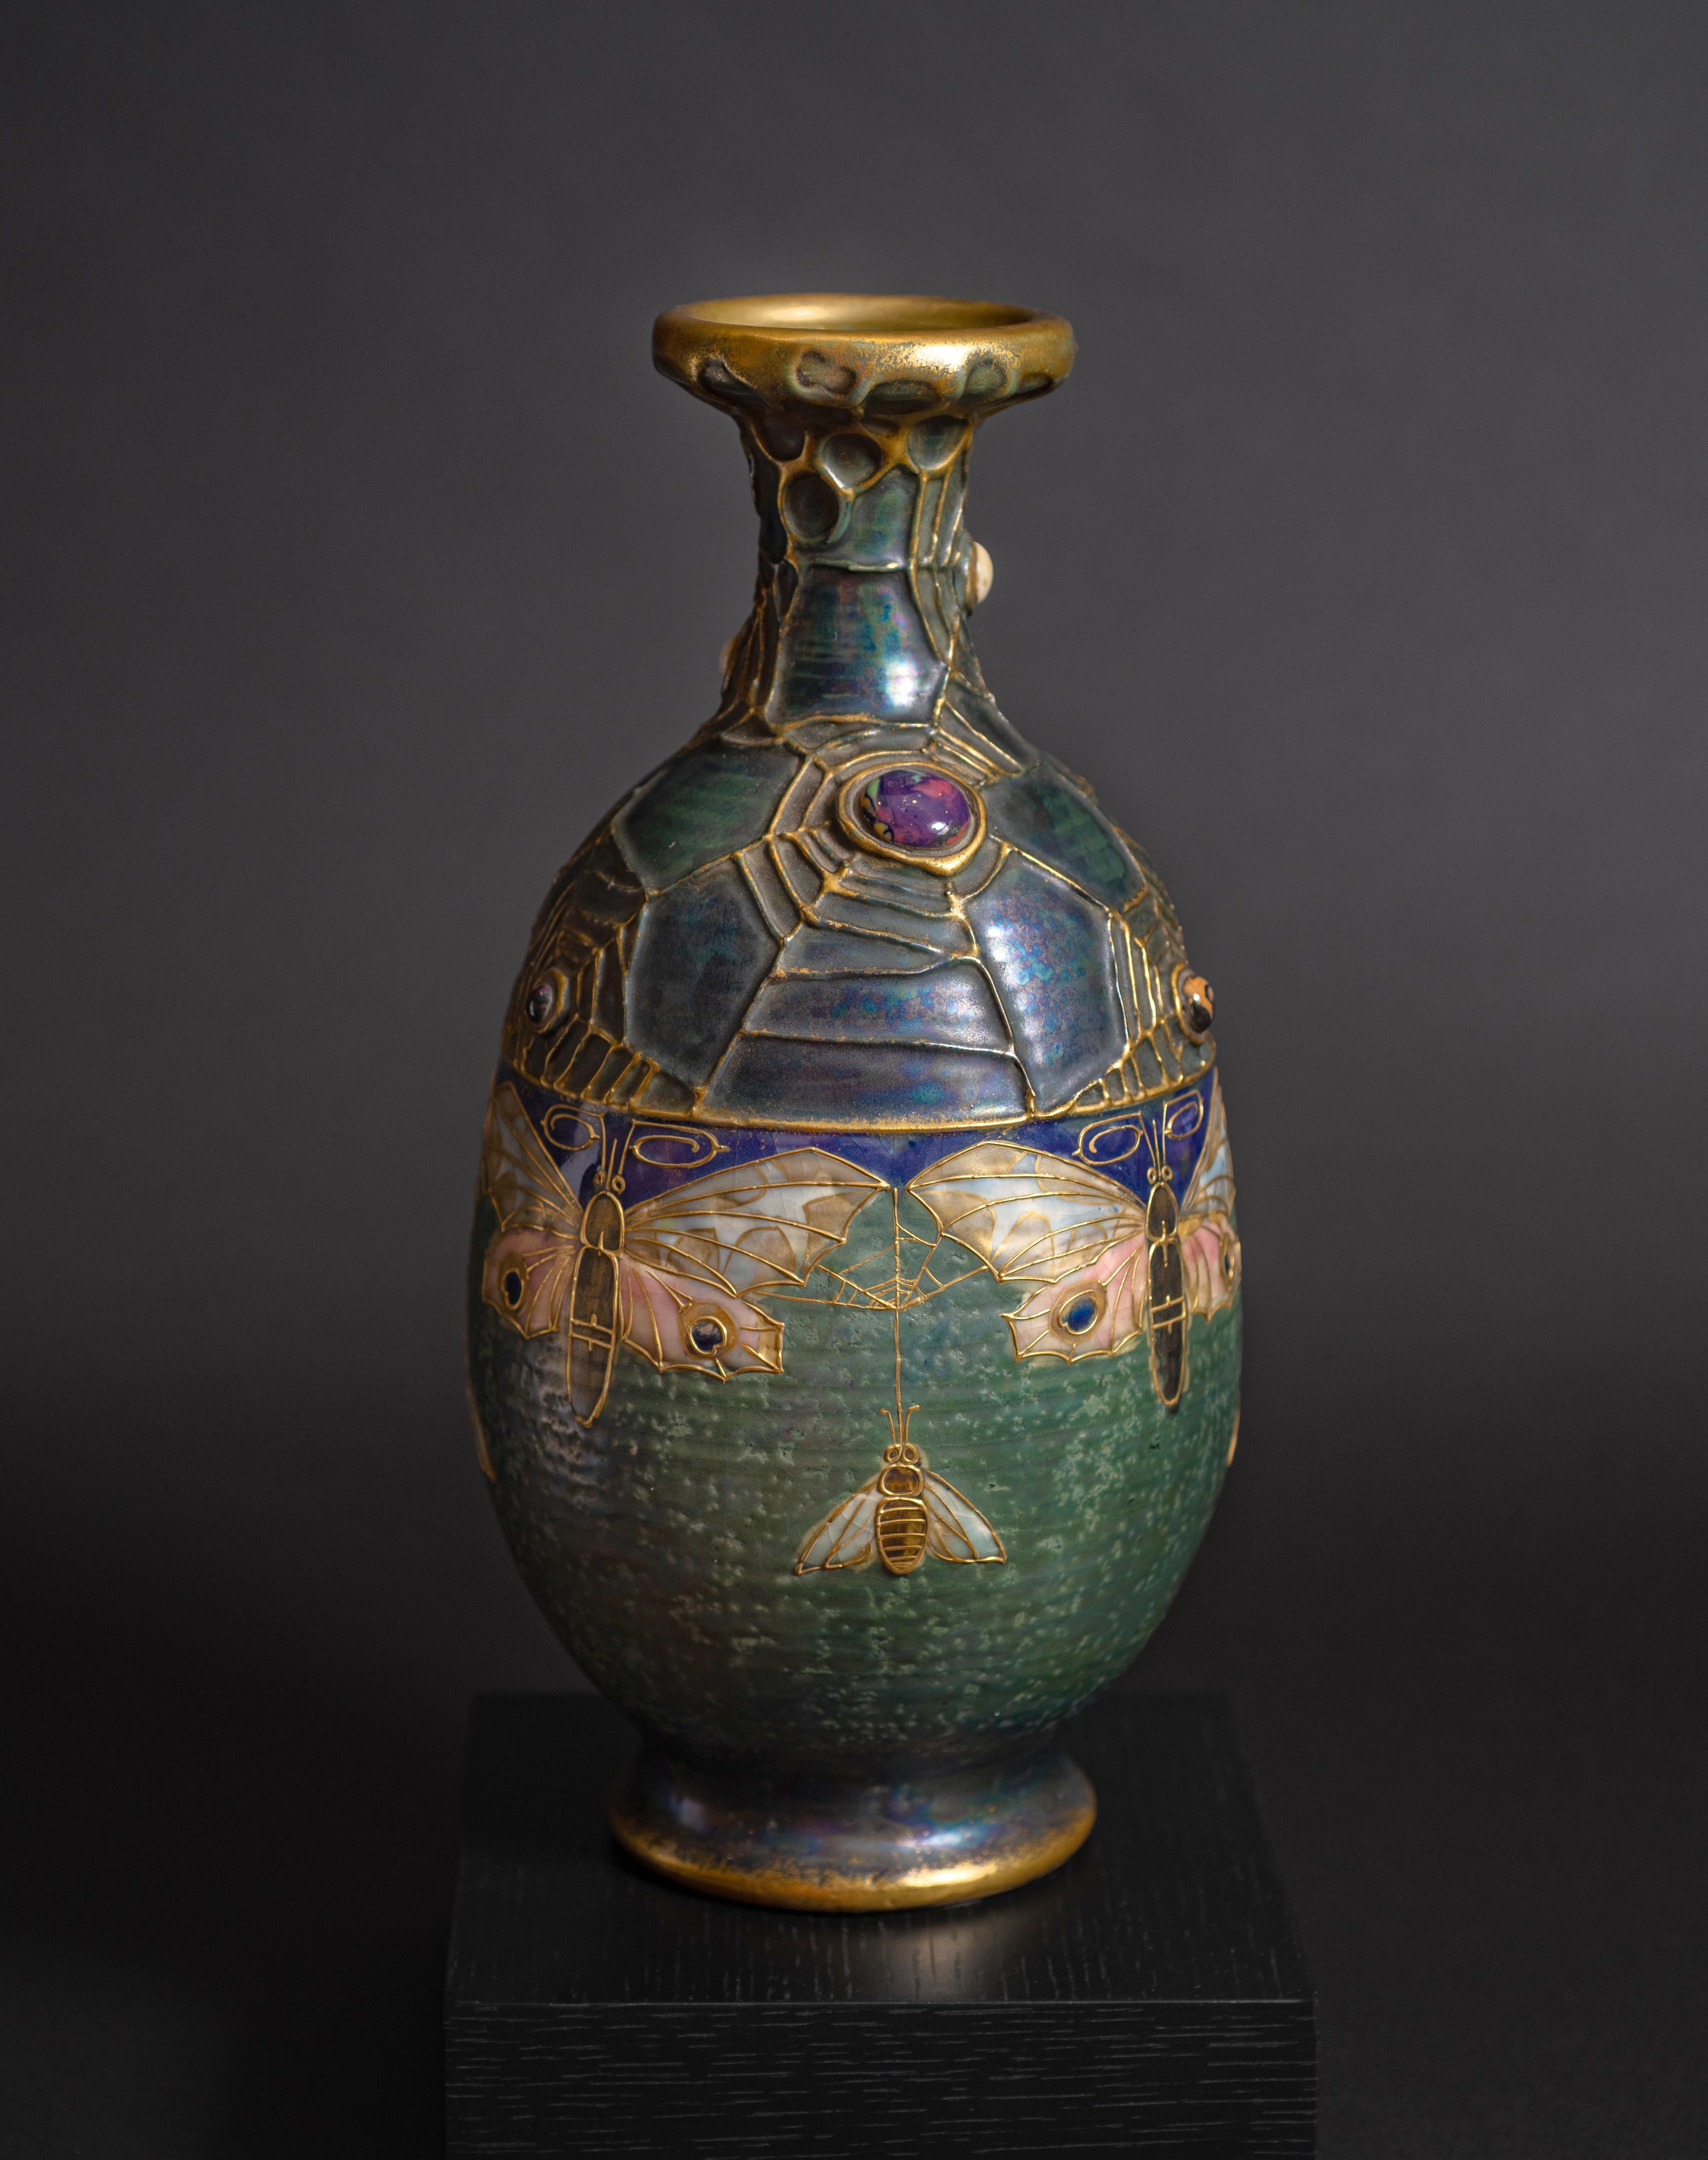 Model #3771

Riessner, Stellmacher and Kessel (RSt&K), consistently marked pieces with the tradename “Amphora” by the late 1890s and became known by that name. The Amphora pottery factory was located in Turn-Teplitz, Austria. By the mid-19th